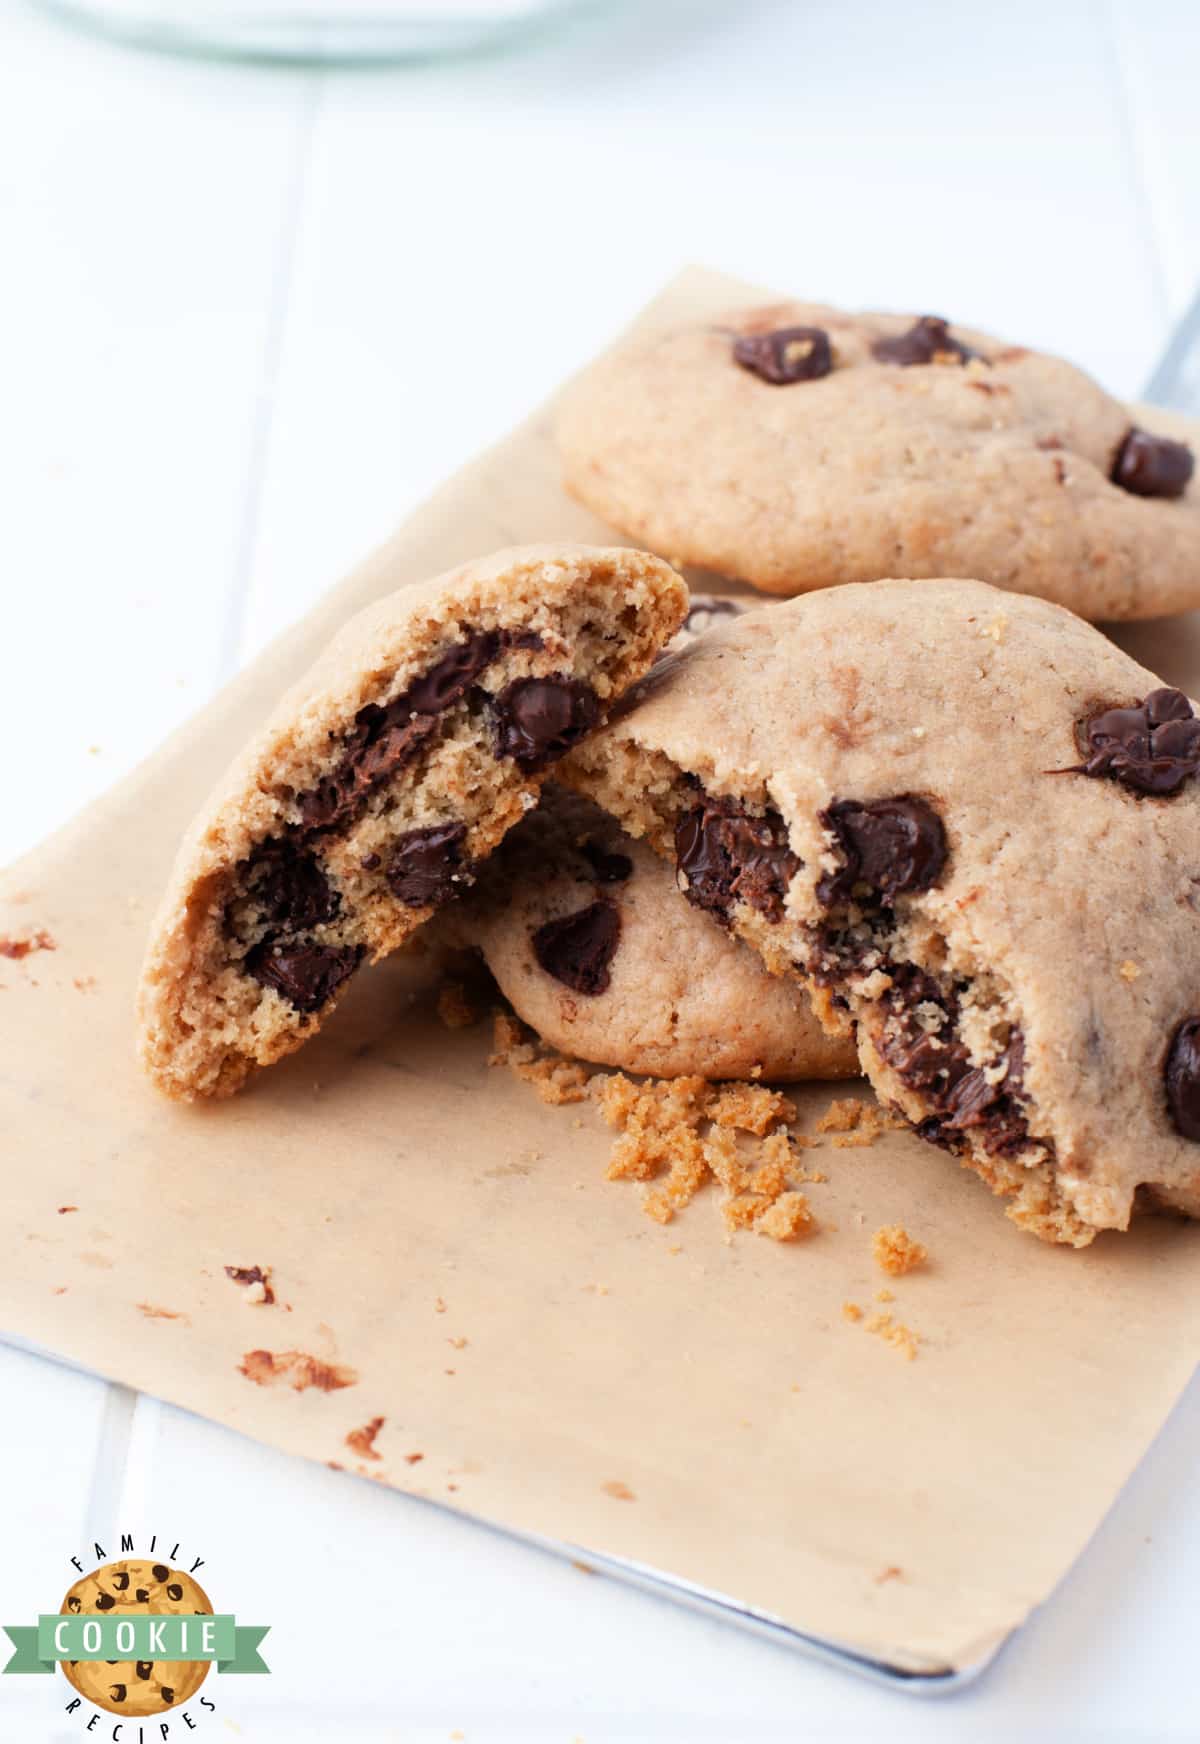 Chocolate Chip Cookies with Nutella in the middle